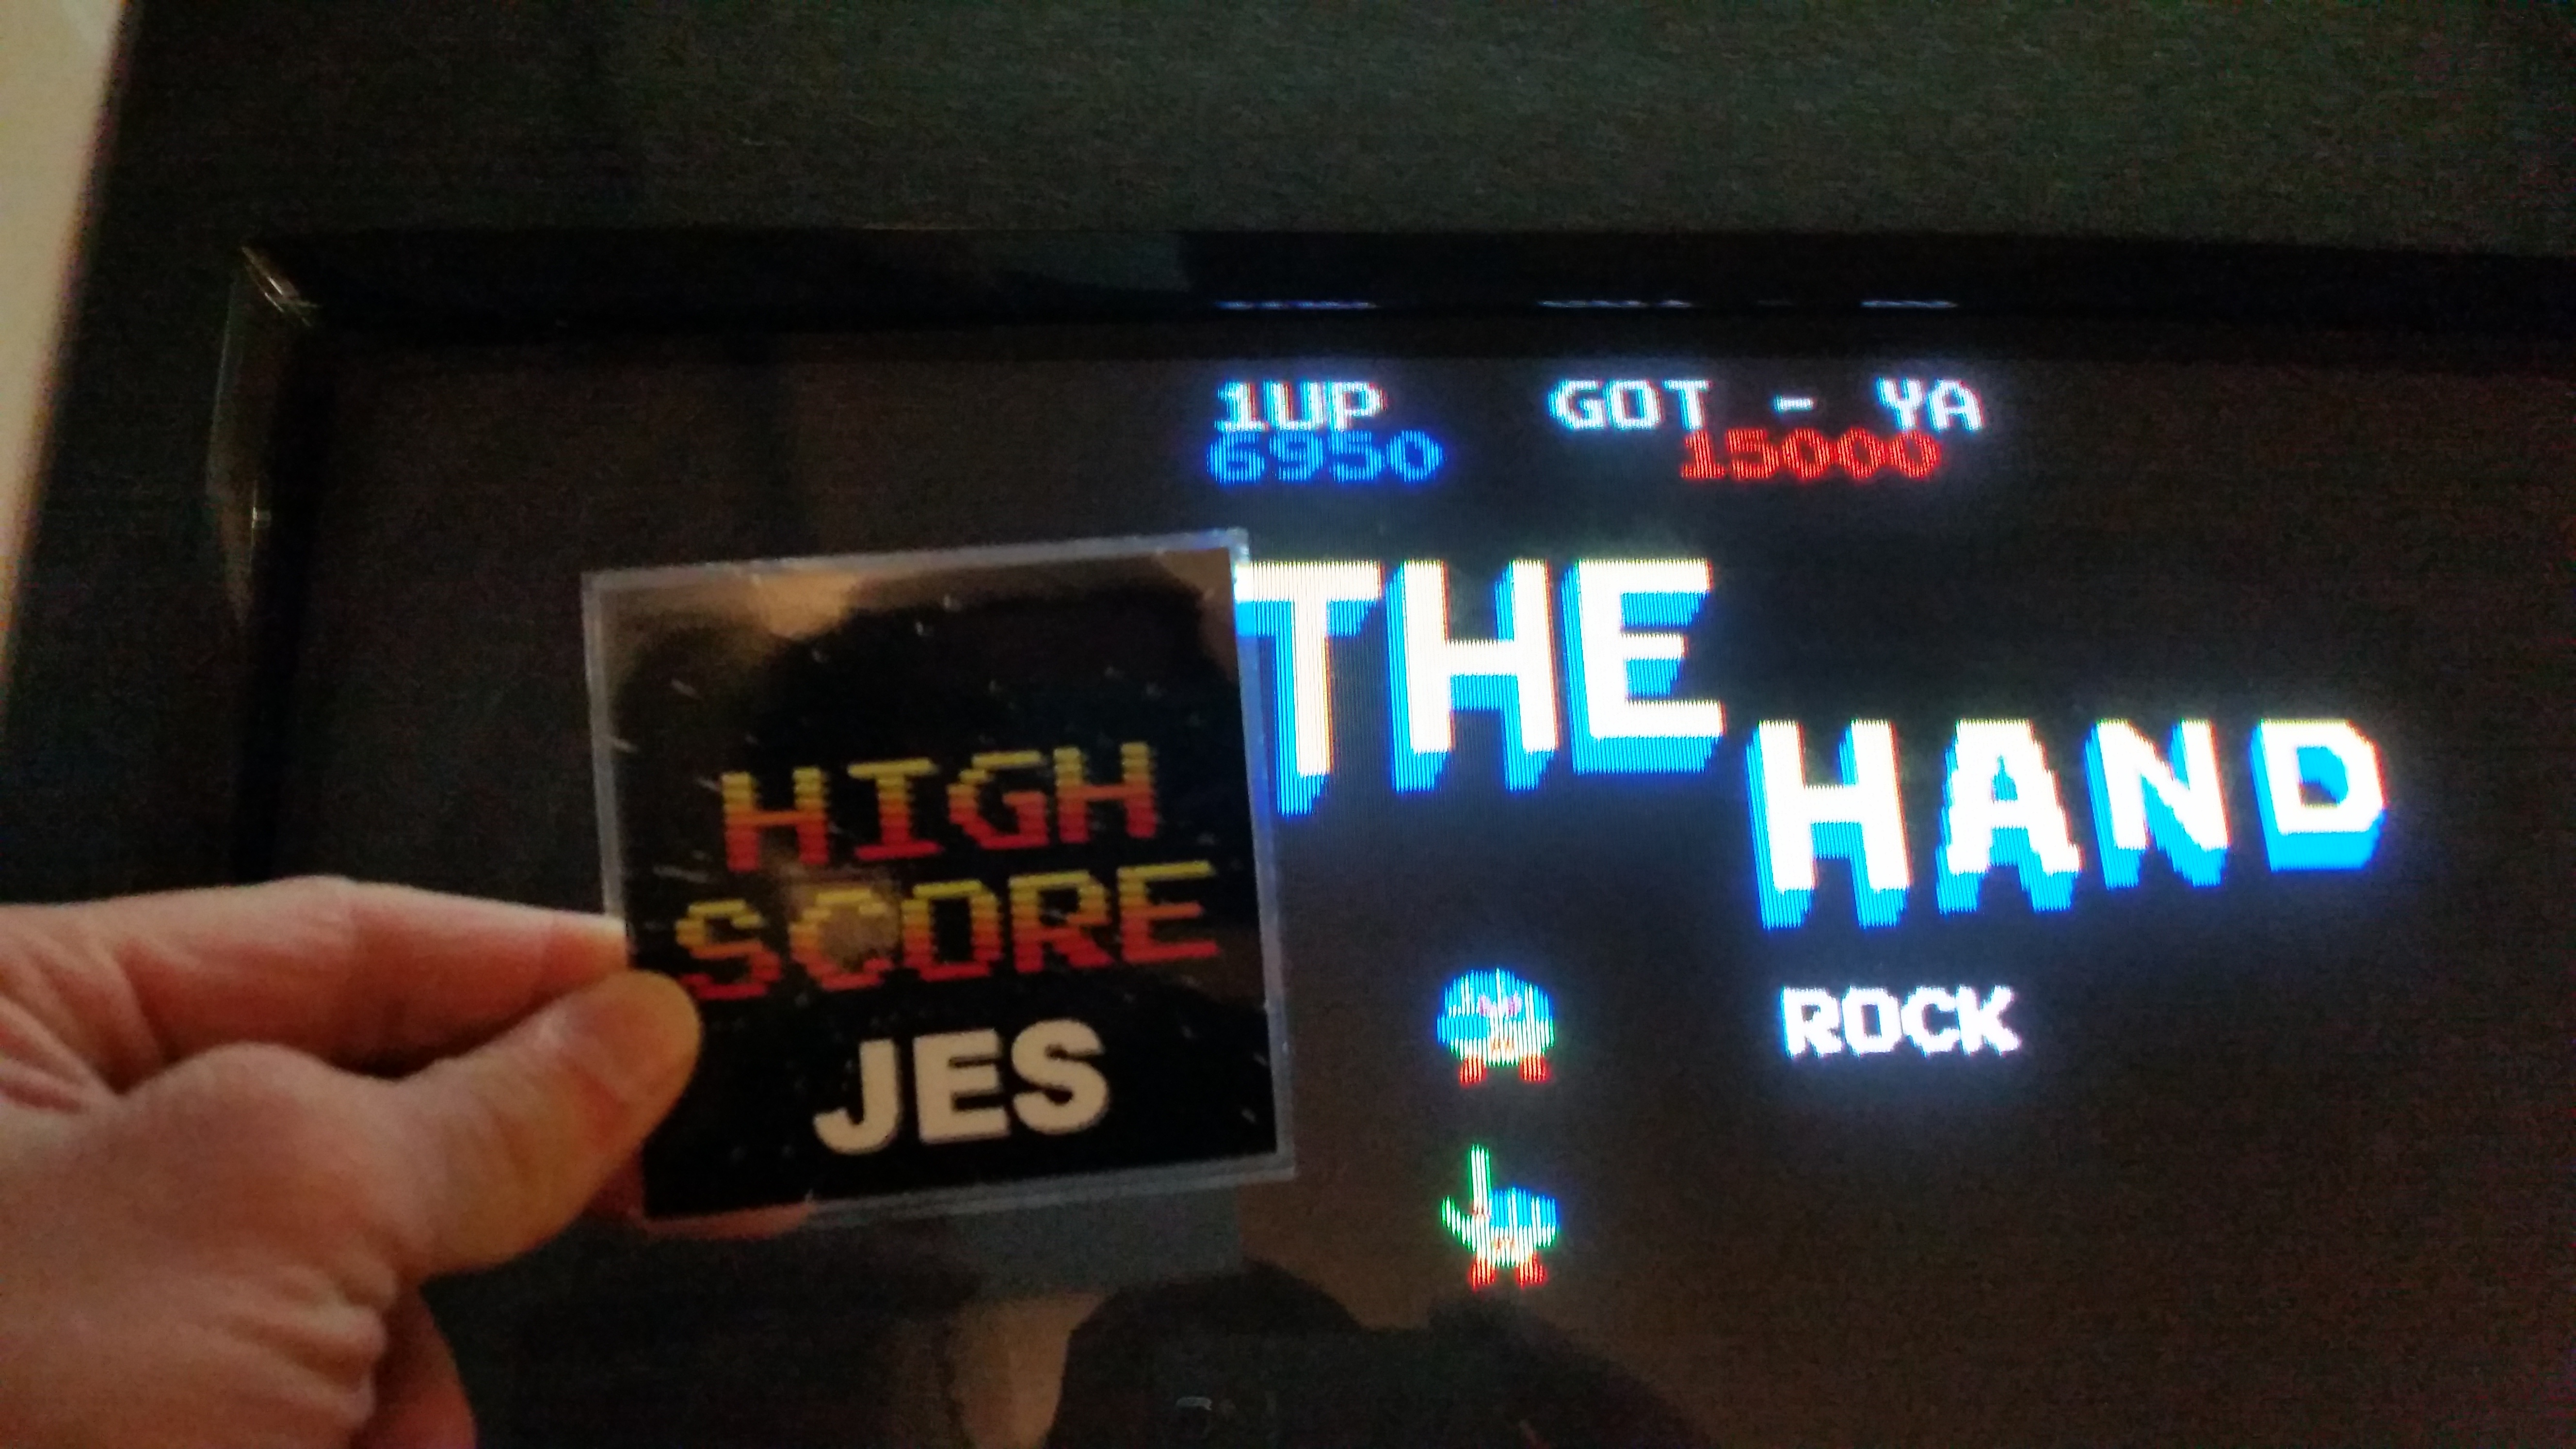 JES: The Hand [thehand] (Arcade Emulated / M.A.M.E.) 6,950 points on 2016-12-18 21:41:46